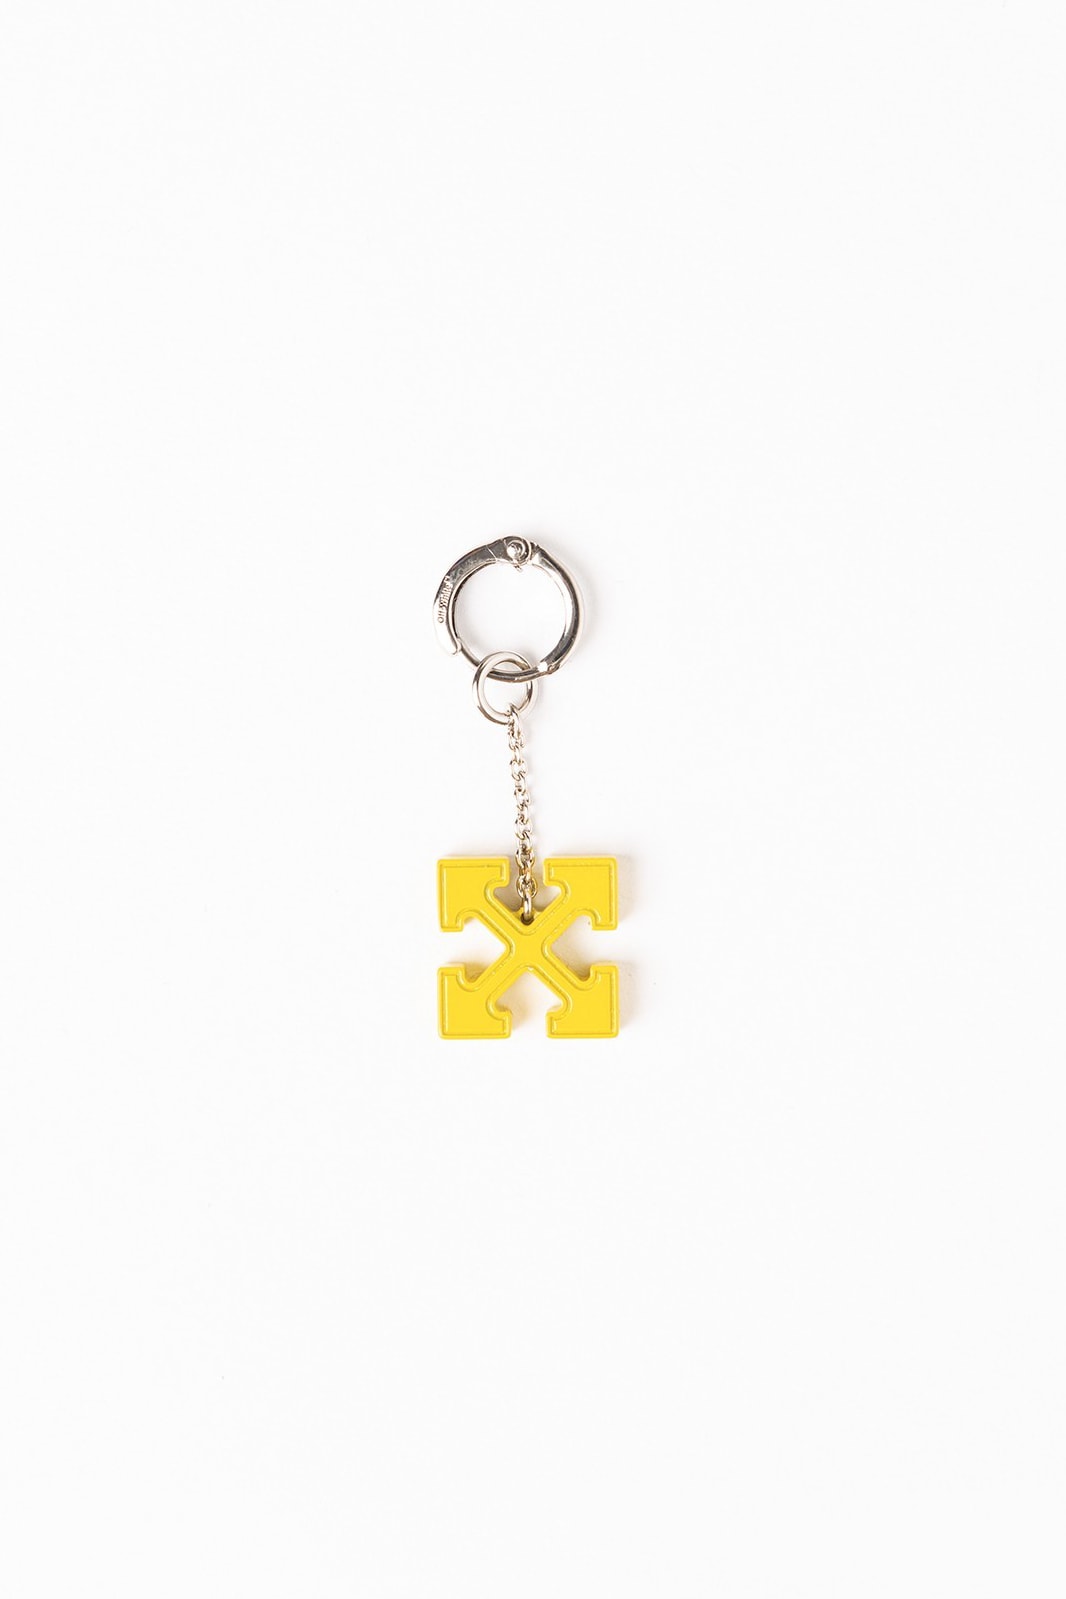 Off White Jewelry Collection Arrows Keychain Silver Yellow